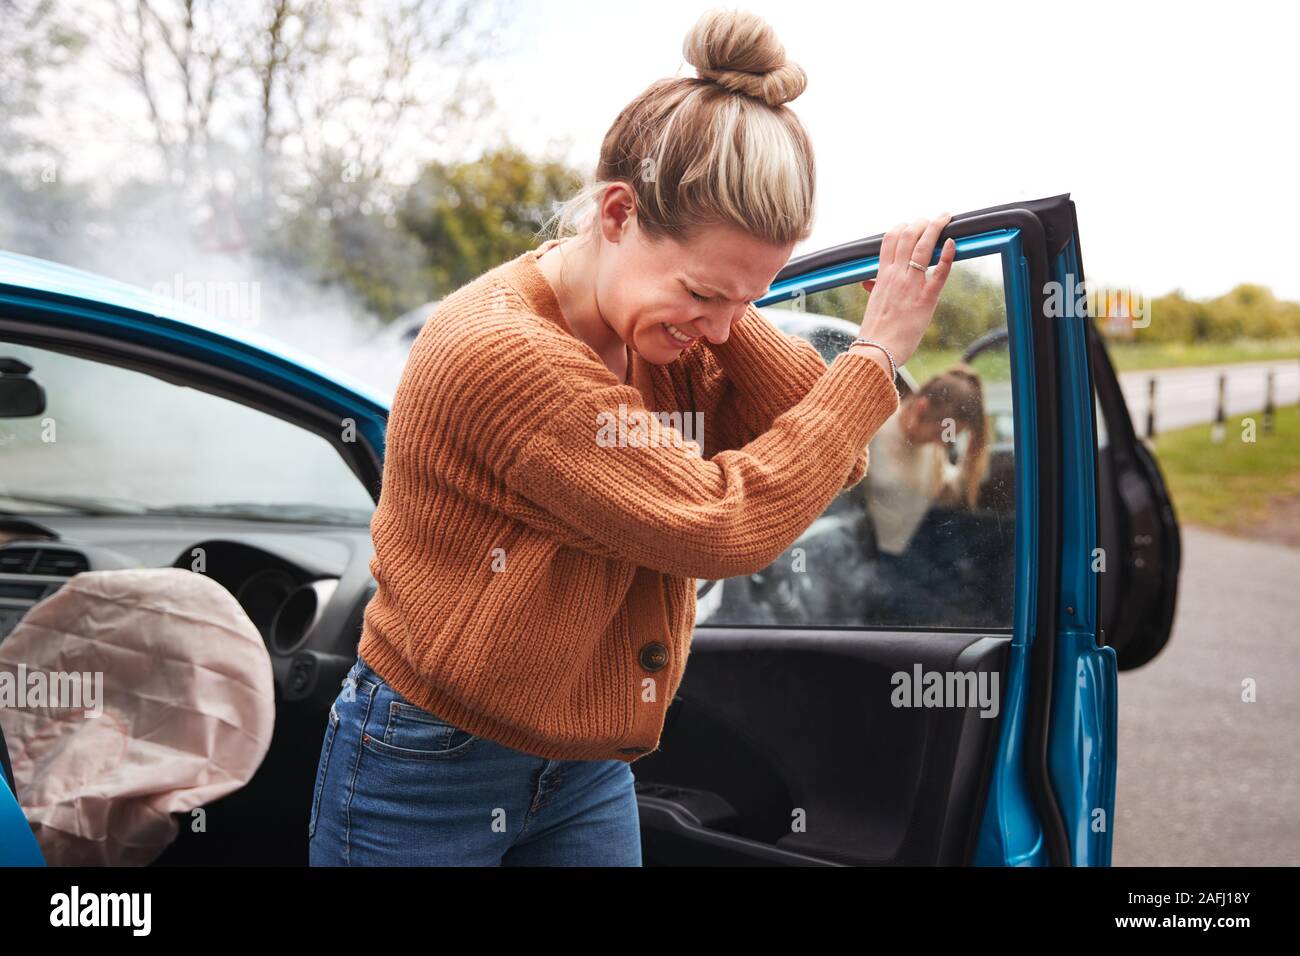 Female Motorist In Crash For Crash Insurance Fraud Getting Out Of Car Stock Photo